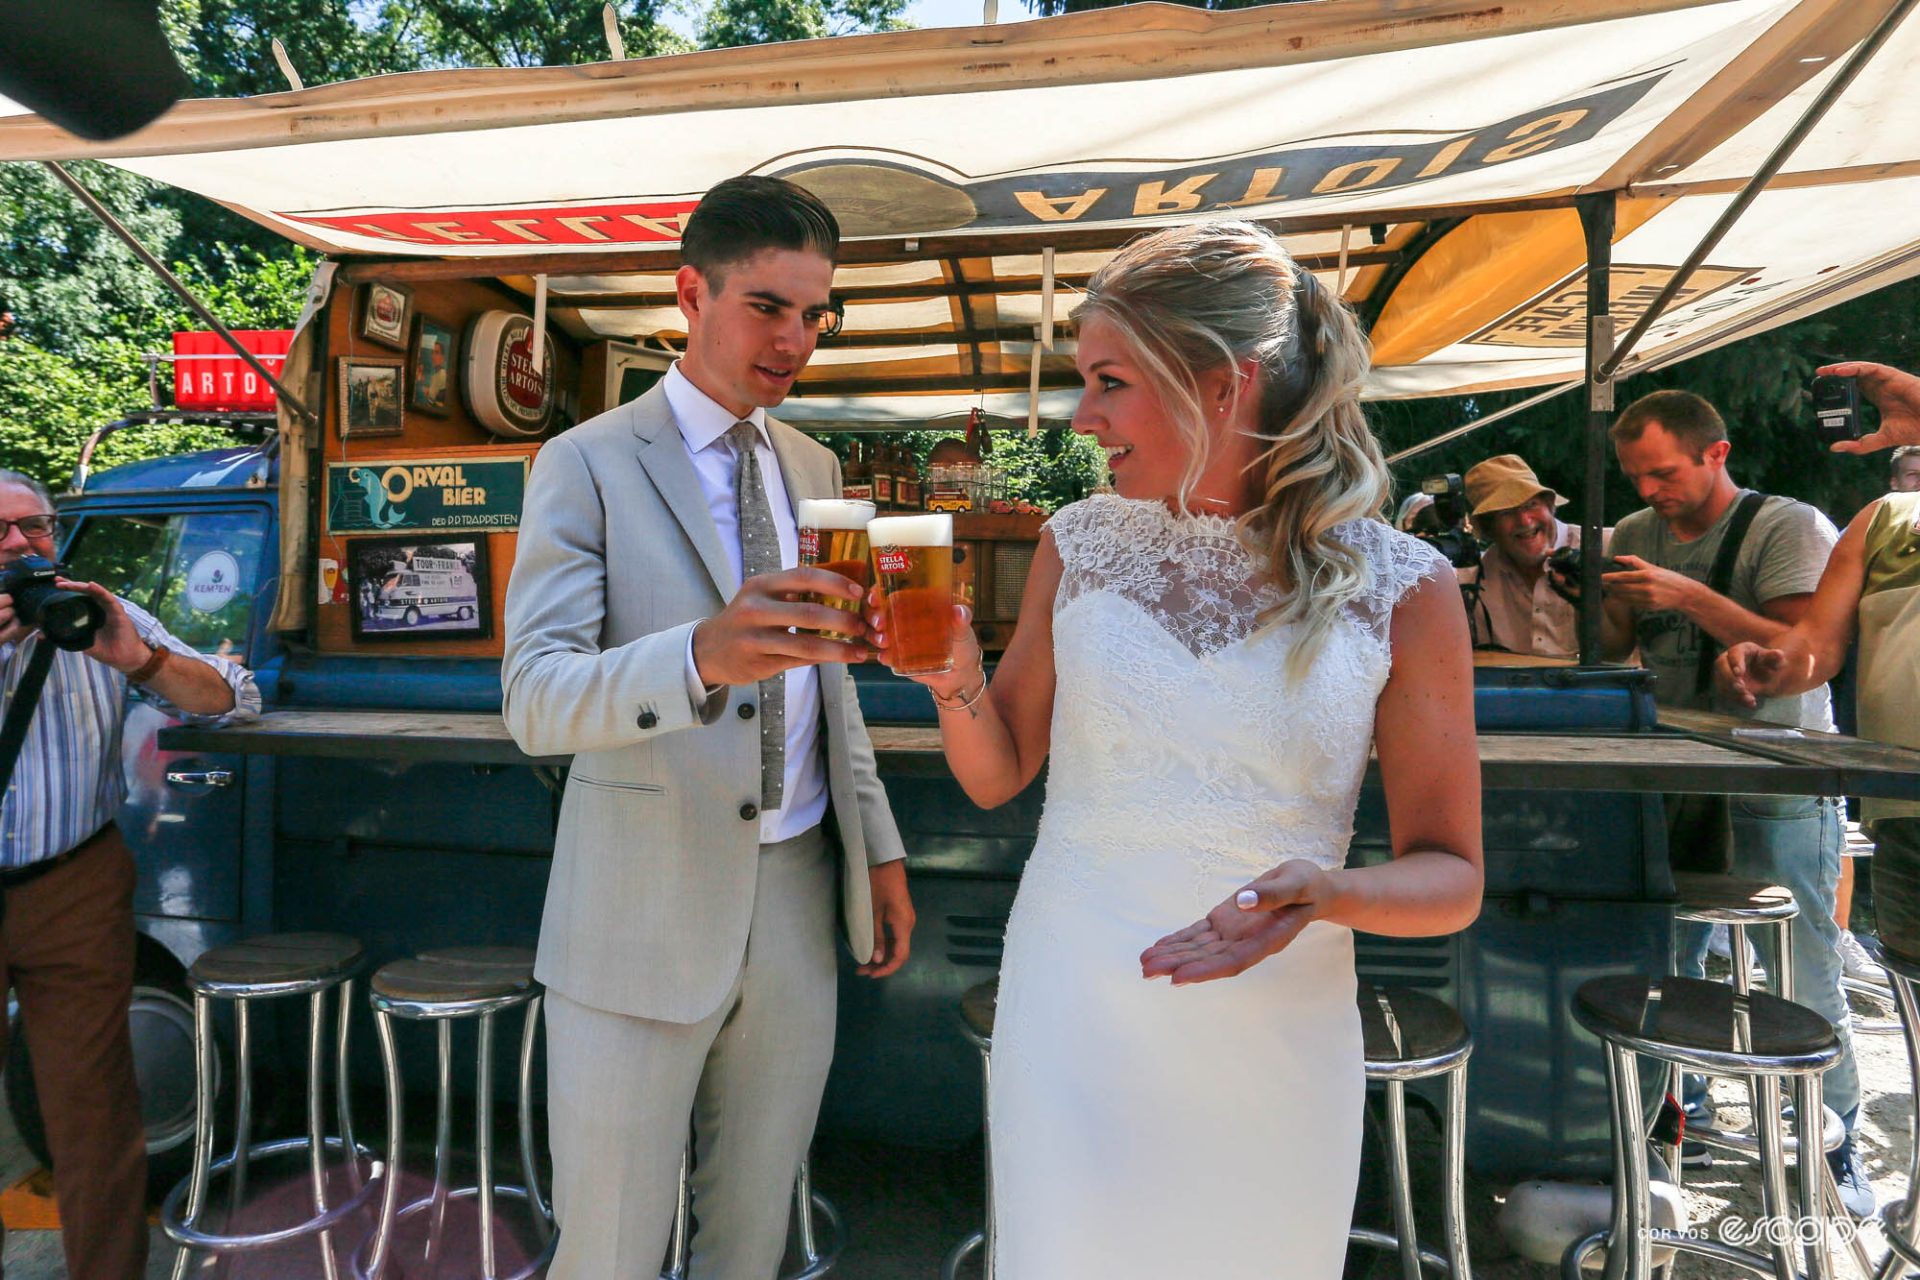 Wout van Aert wearing a nice suit and his wife Sarah De Bie, standing in front of a vintage beer truck with a Stella Artois each, clinking glasses while a bunch of photographers in t-shirts mill about. 